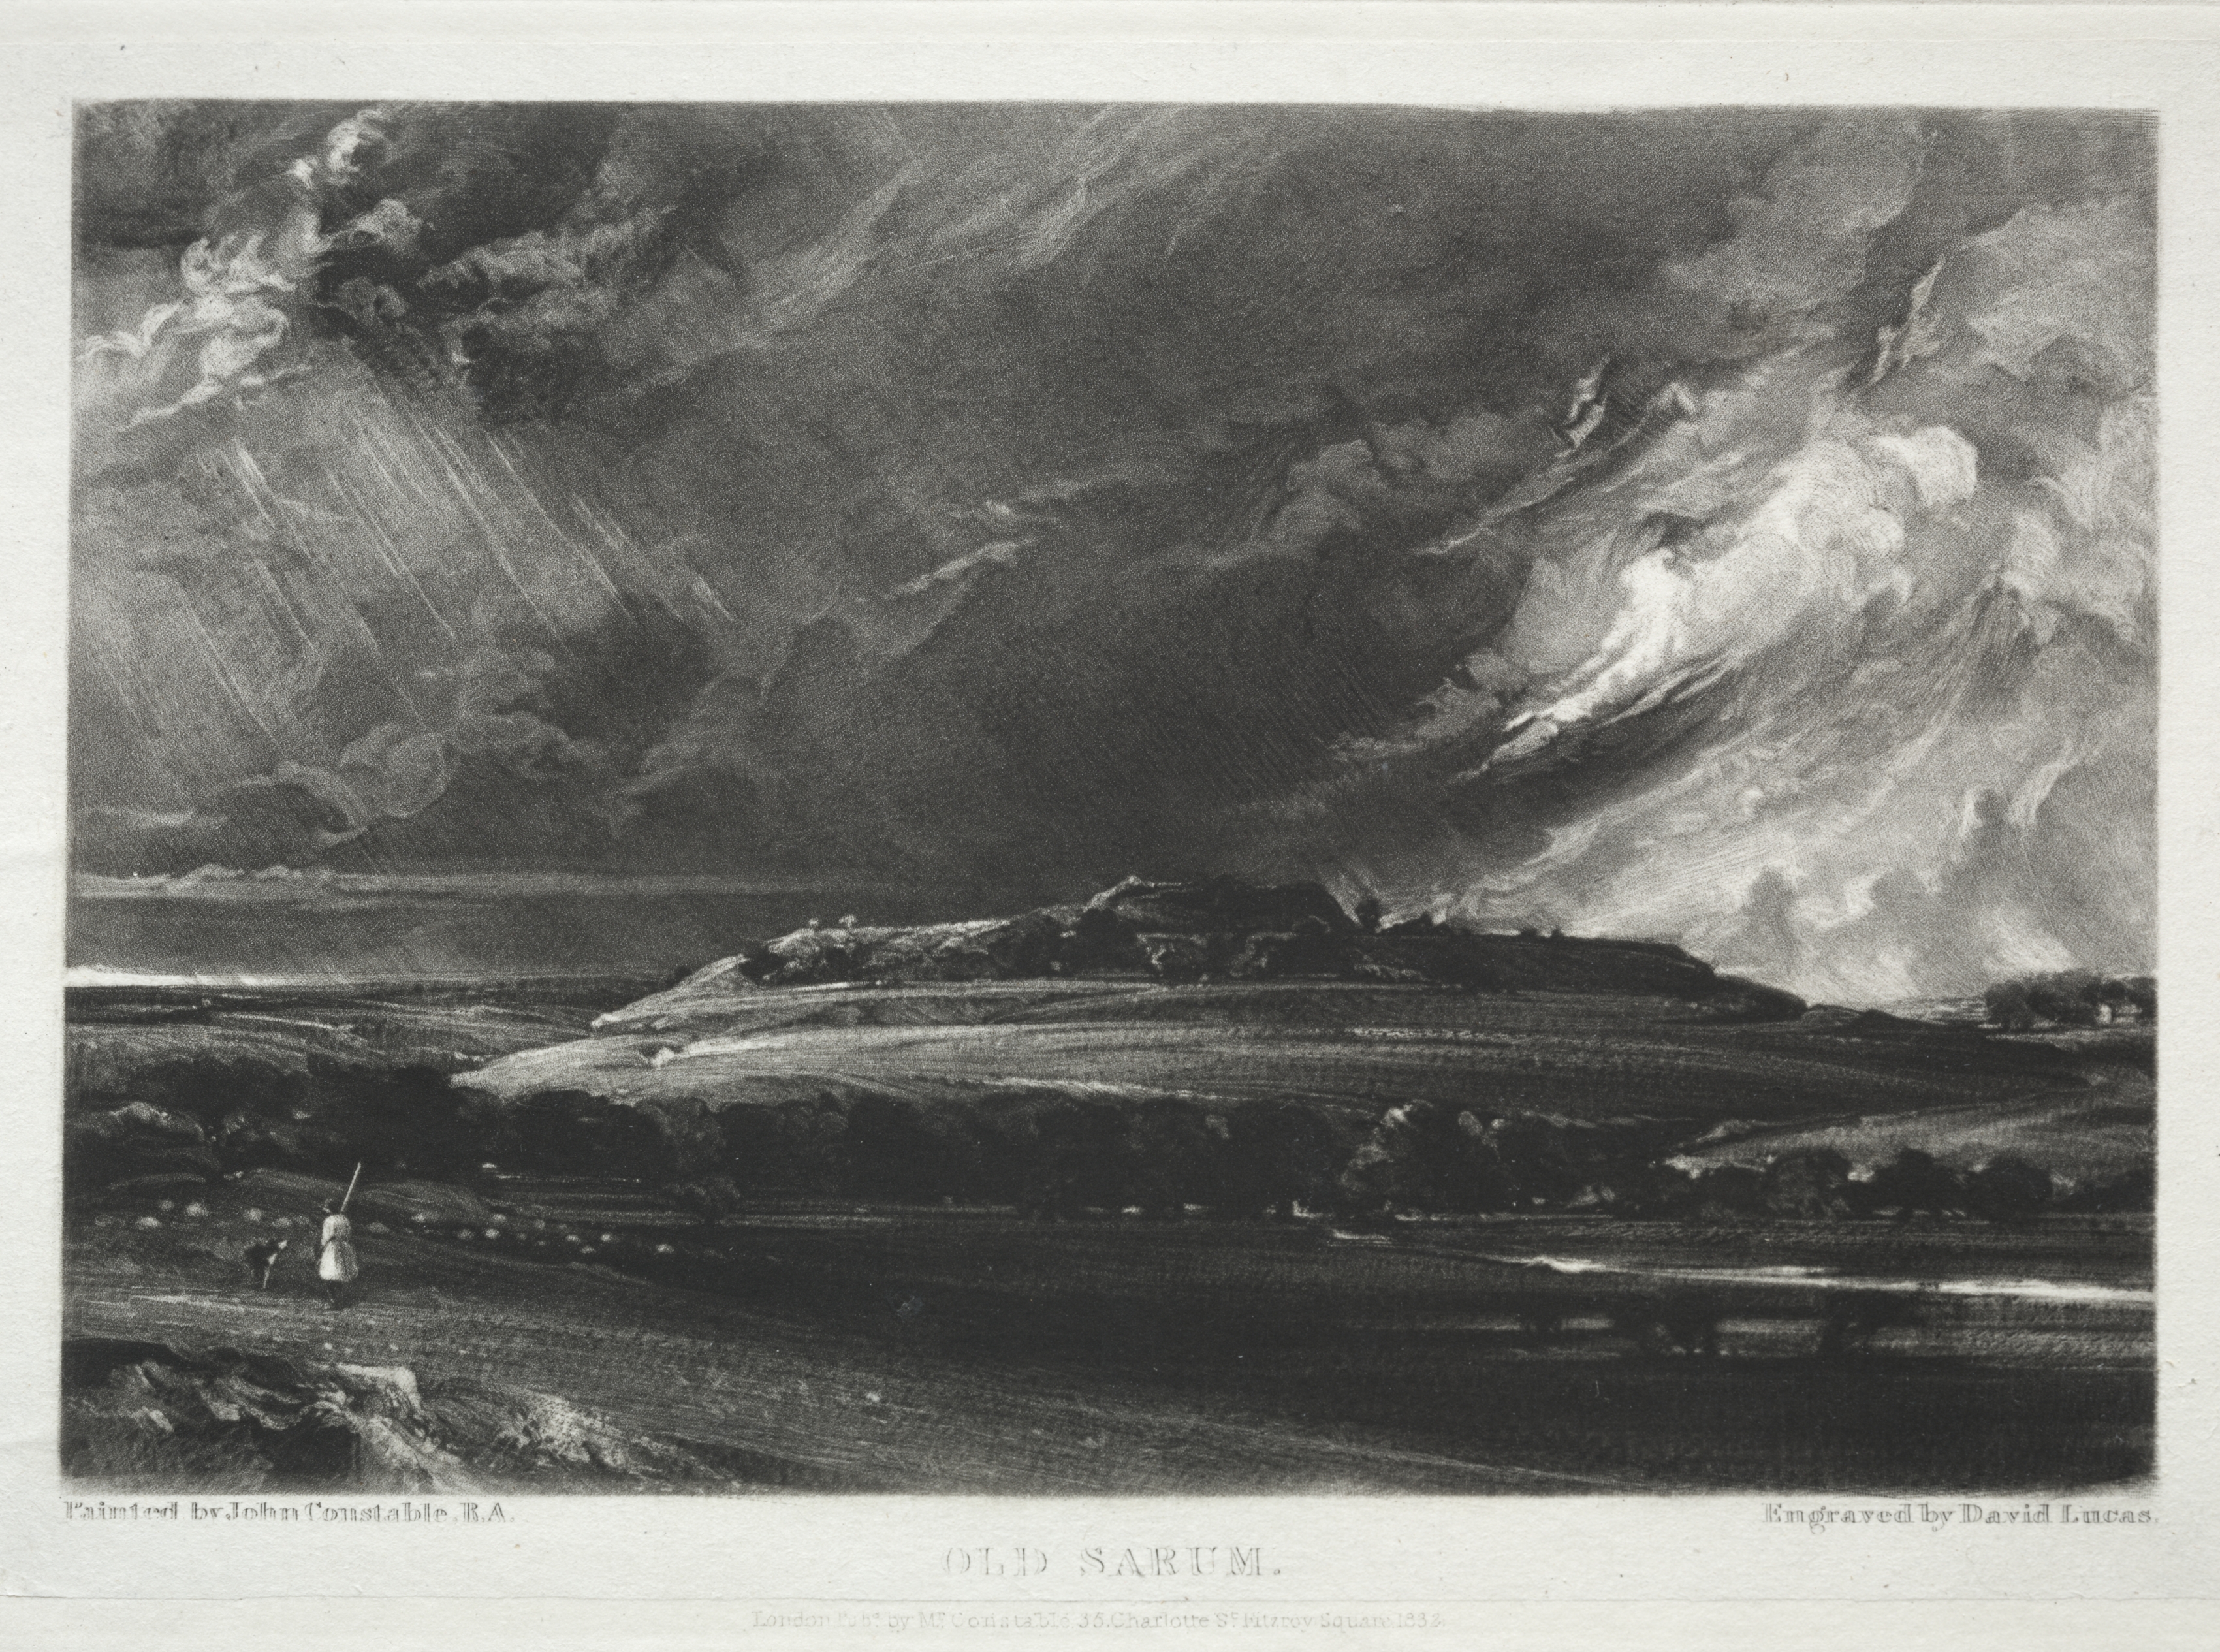 Various Subjects of Landscape, Characteristic of English Scenery from Pictures Painted by John Constable, R.A.:  Old Sarum